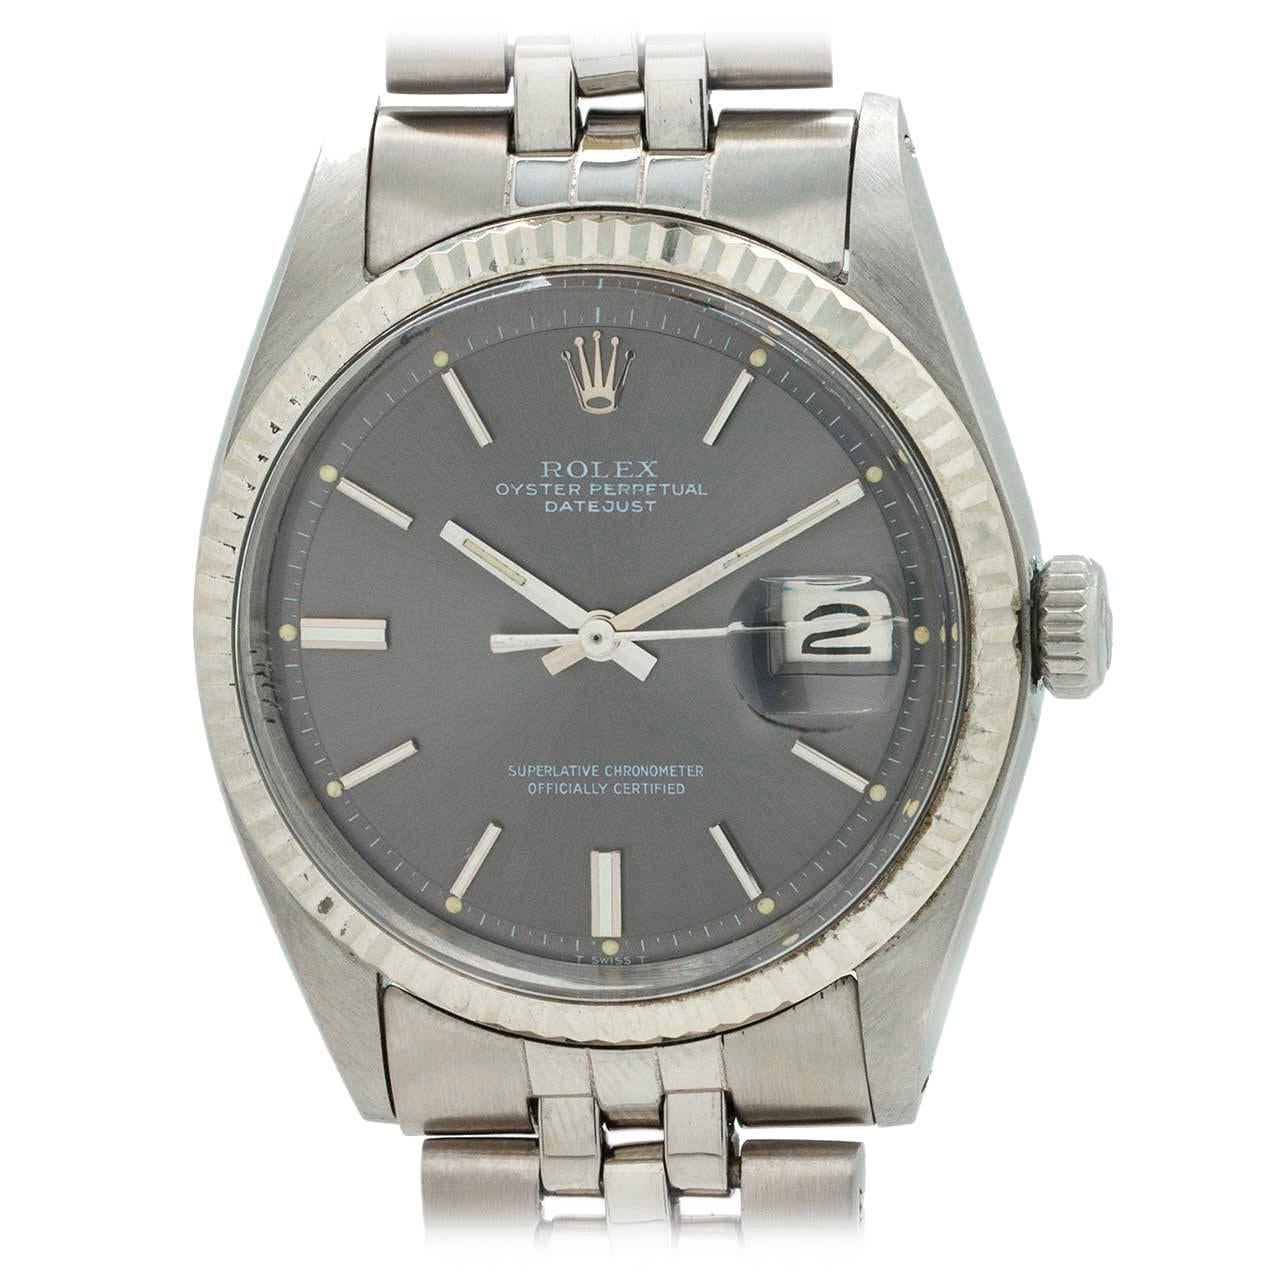 Rolex Stainless Steel Oyster Perpetual Datejust Wristwatch Ref 1601